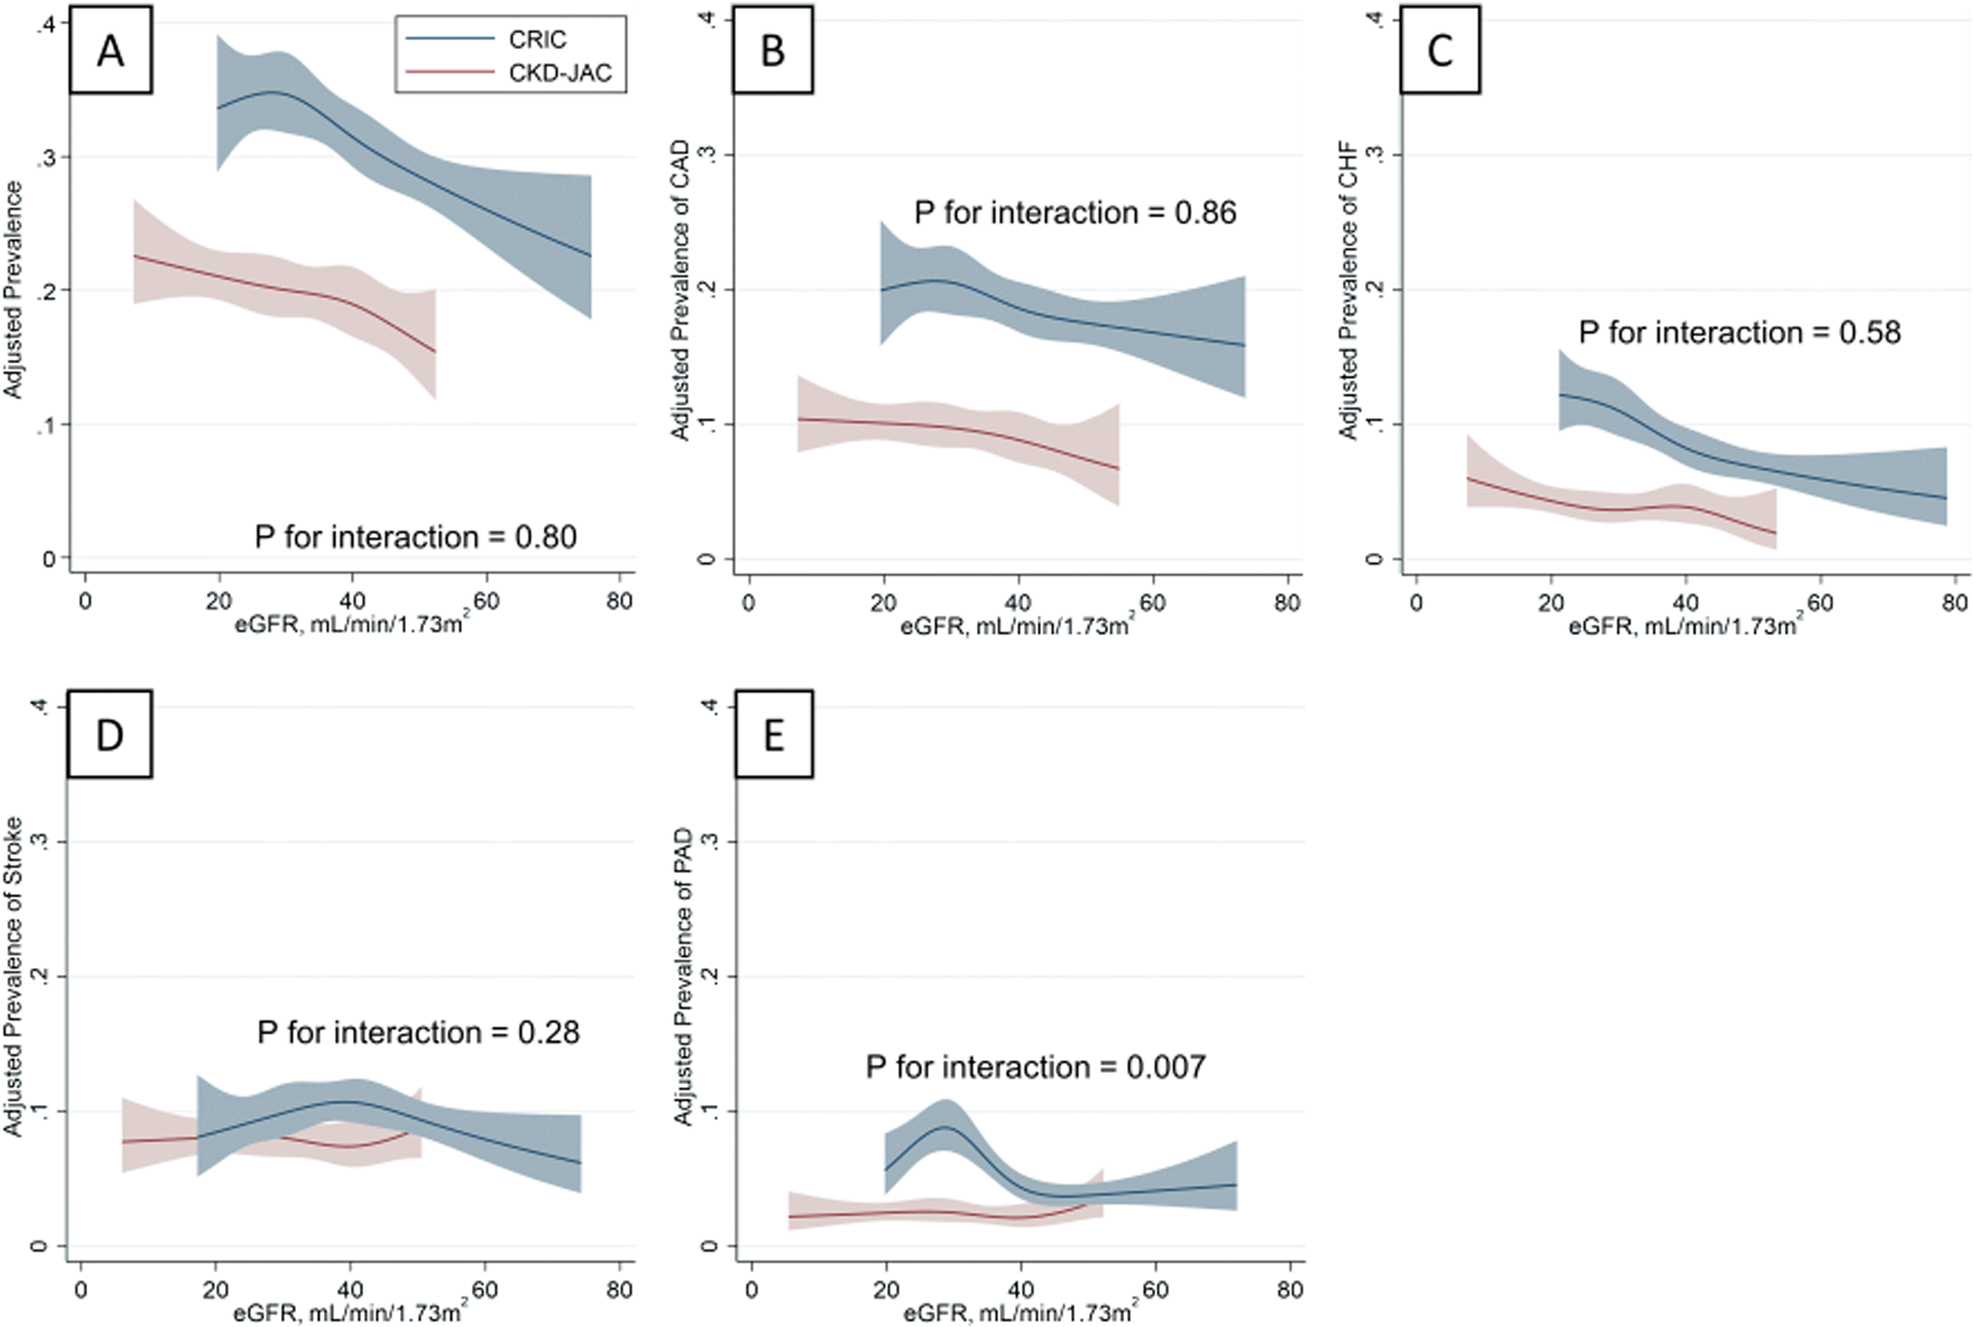 Cardiovascular disease history and β-blocker prescription patterns among  Japanese and American patients with CKD: a cross-sectional study of the  CRIC and CKD-JAC studies | Hypertension Research